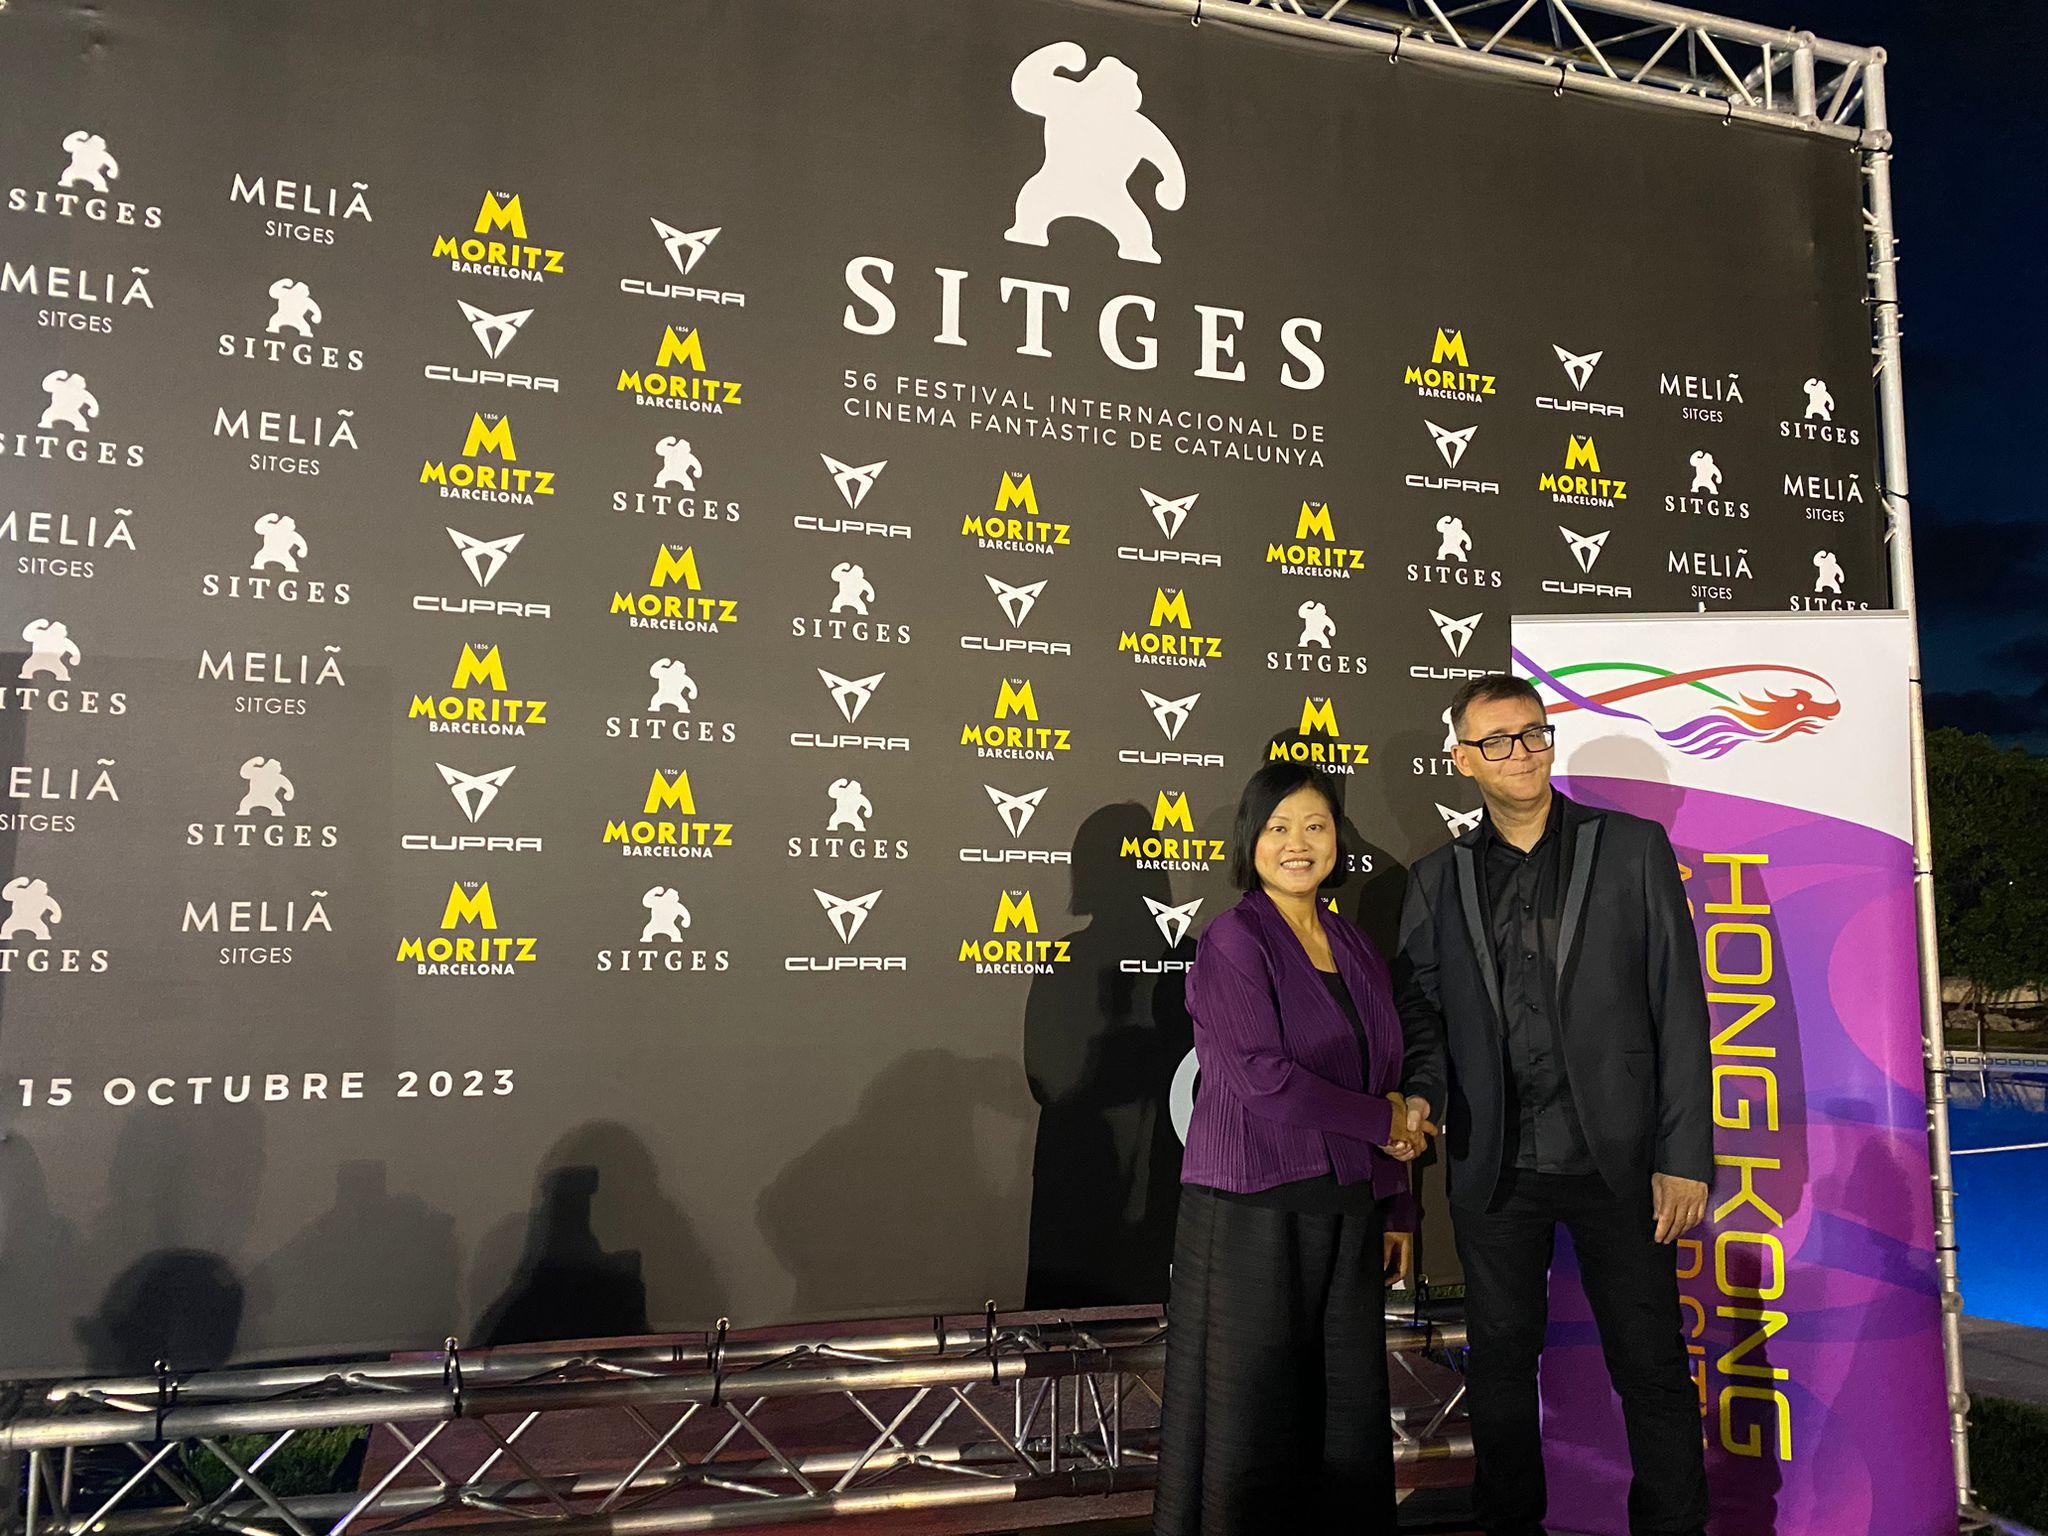 The Hong Kong Economic and Trade Office in Brussels, Create Hong Kong and Film Development Fund are jointly supporting the 56th Sitges International Fantastic Film Festival of Catalonia, being held in Sitges in Spain from October 5 to 15 (Sitges time). Photo shows the Special Representative for Hong Kong Economic and Trade Affairs to the European Union, Ms Shirley Yung (left), and the Director of the Sitges International Fantastic Film Festival of Catalonia, Mr Angel Sala (right), at the cocktail reception on October 8 (Sitges time).